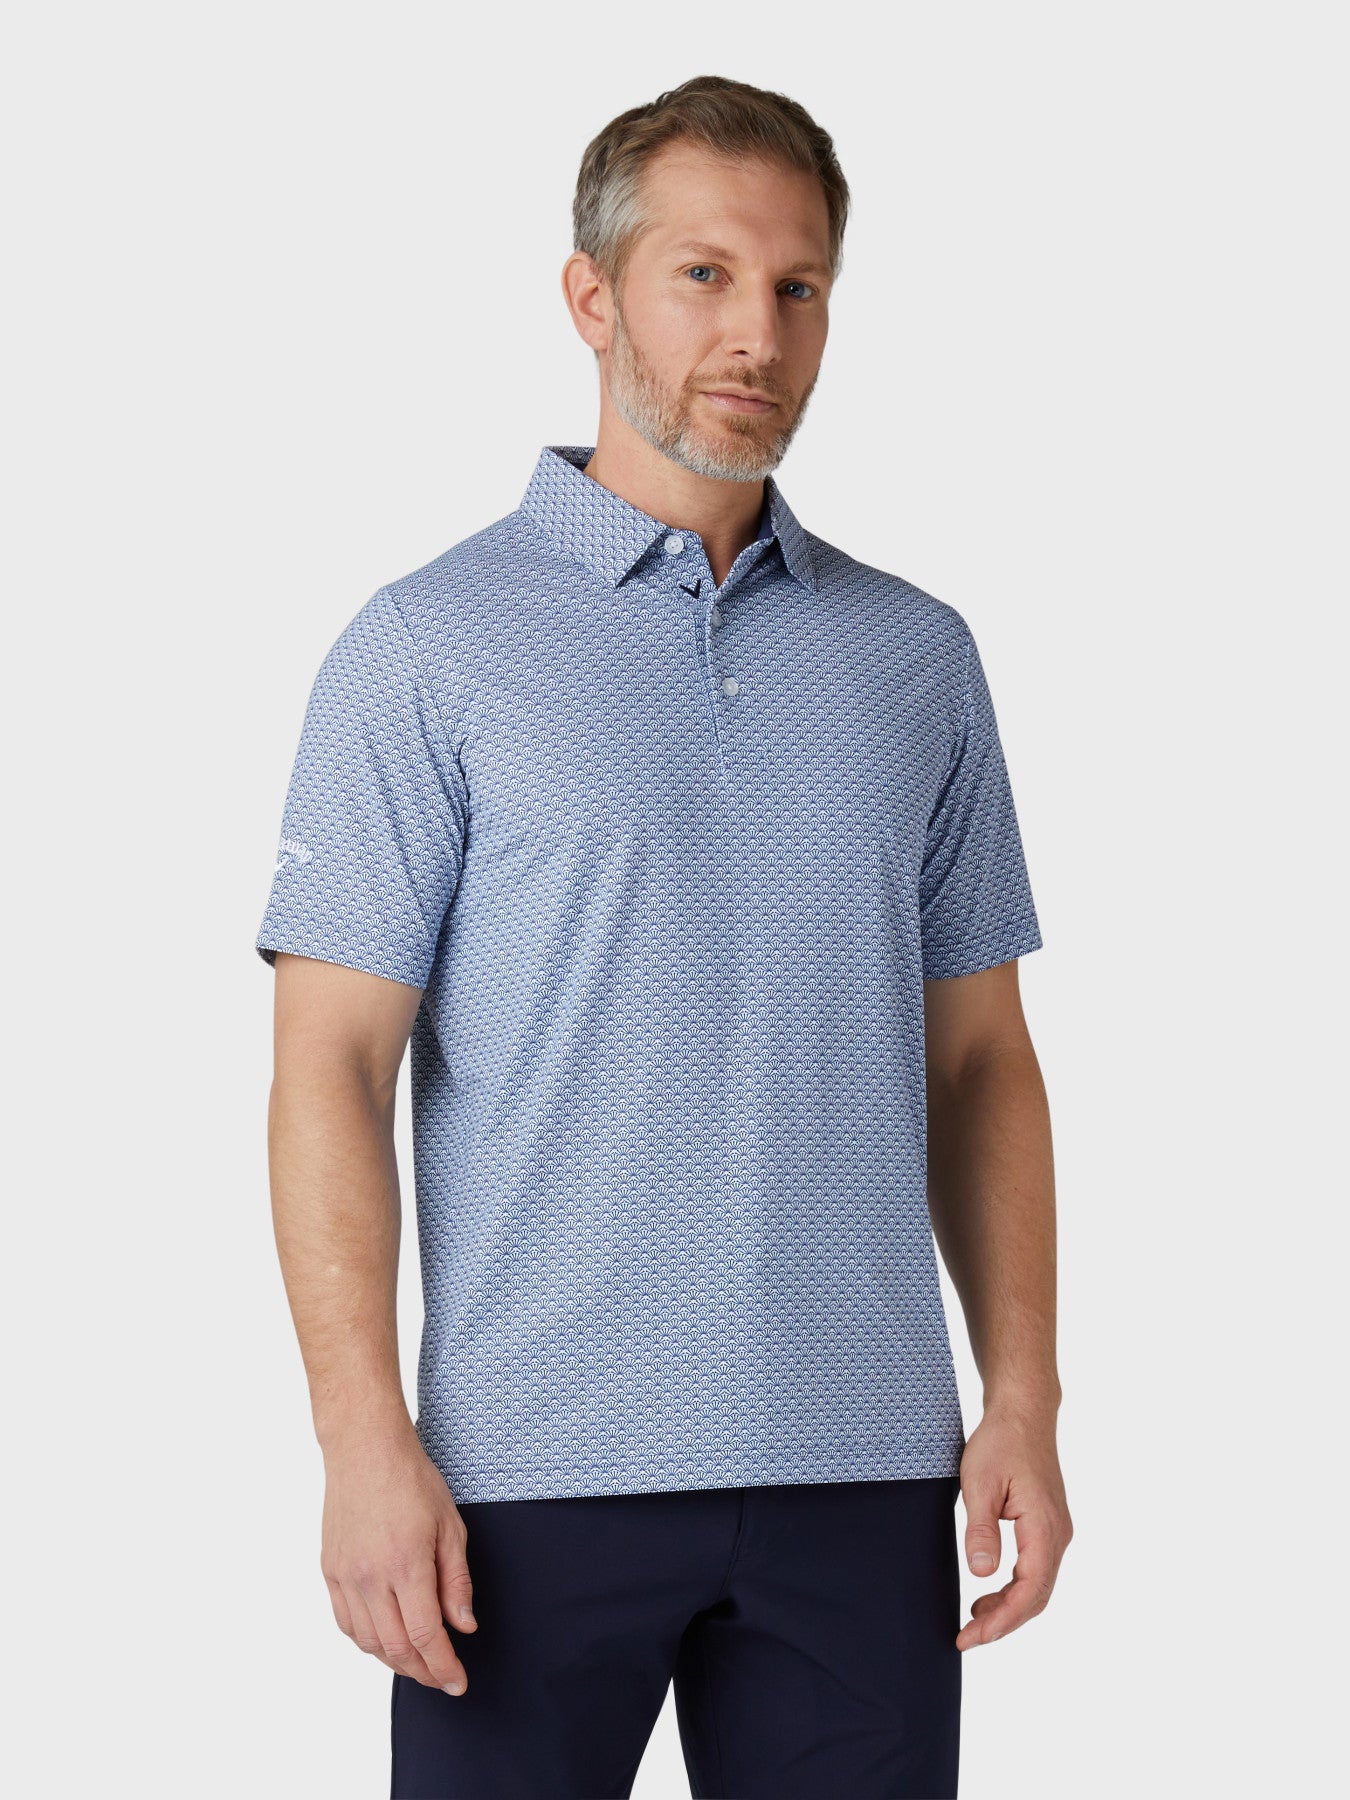 View Mens Tradmark Print Polo In Peacoat information